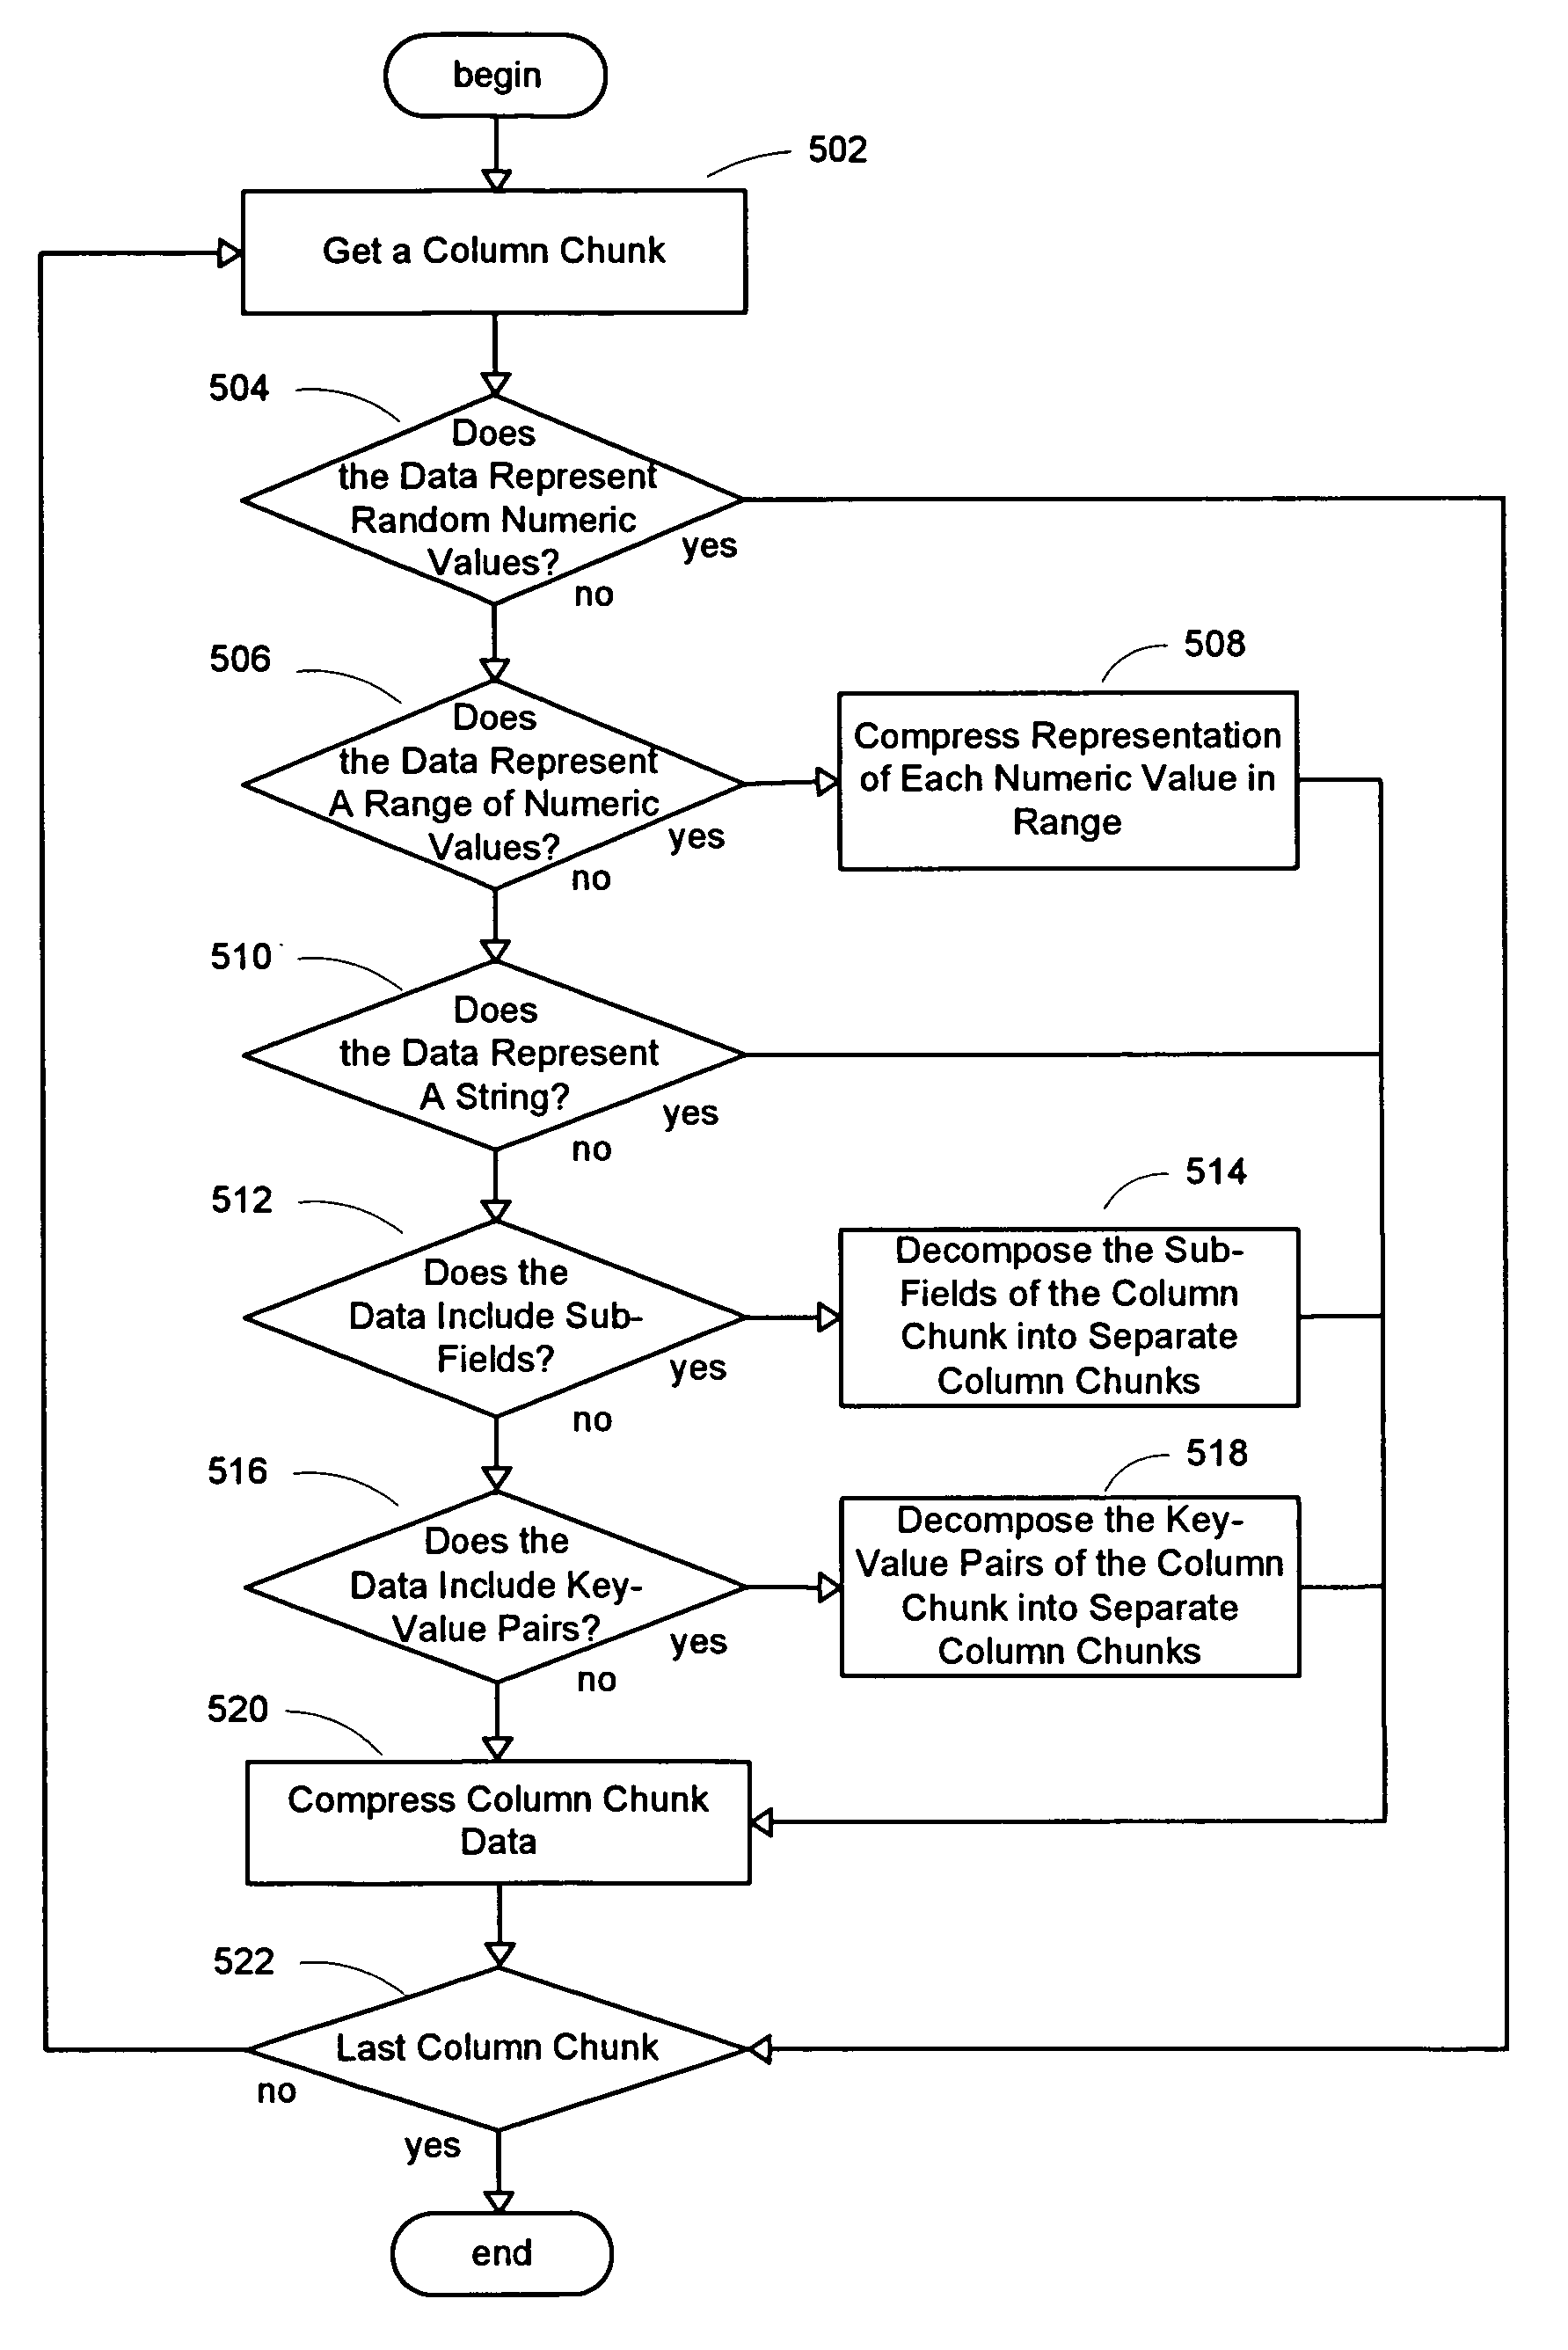 System and method for compression in a distributed column chunk data store